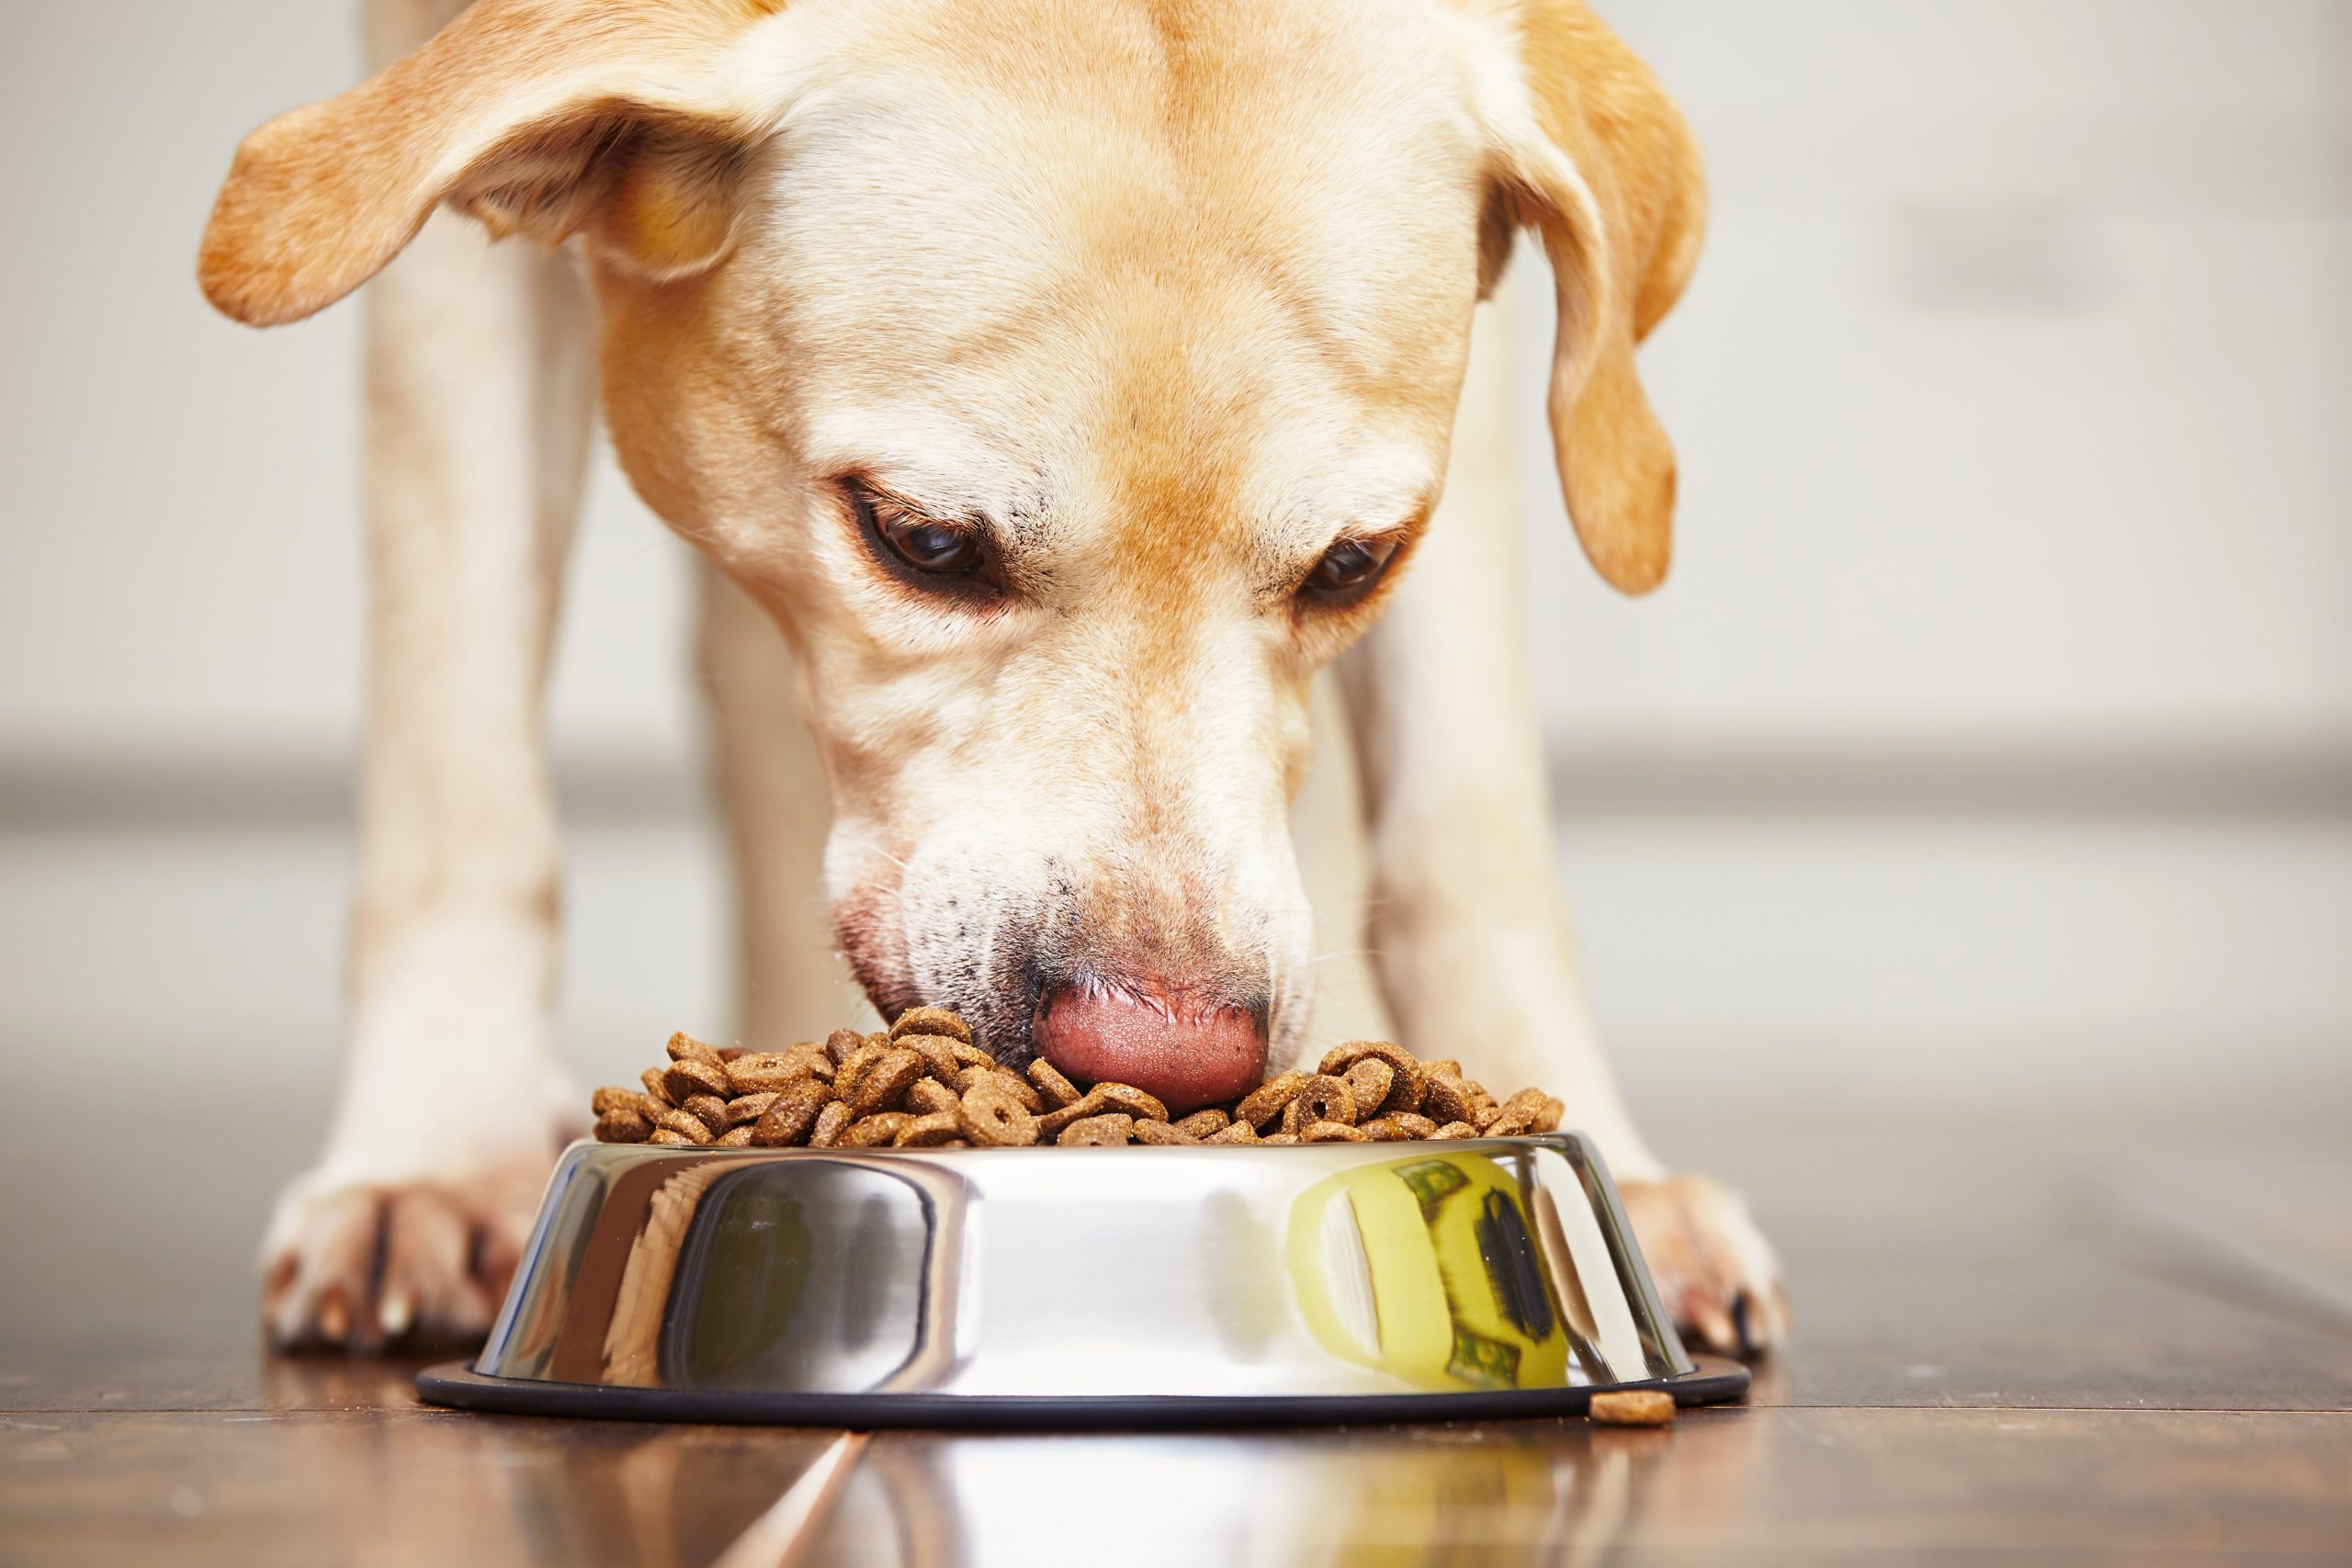 Vets warning over human salmonella risk from recalled dog food